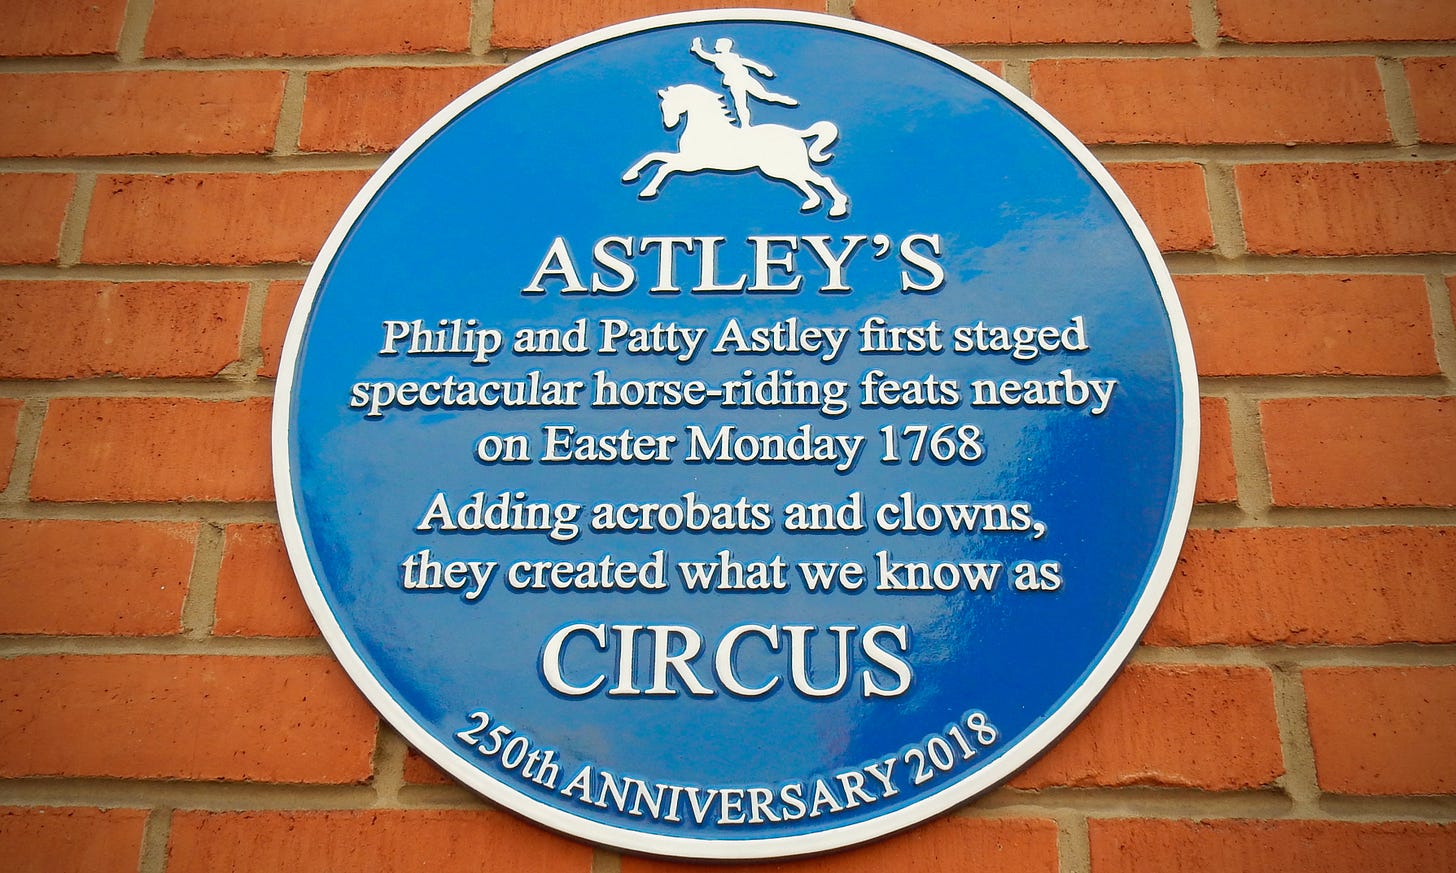 Blue plaque marking the original site of Astley's Circus